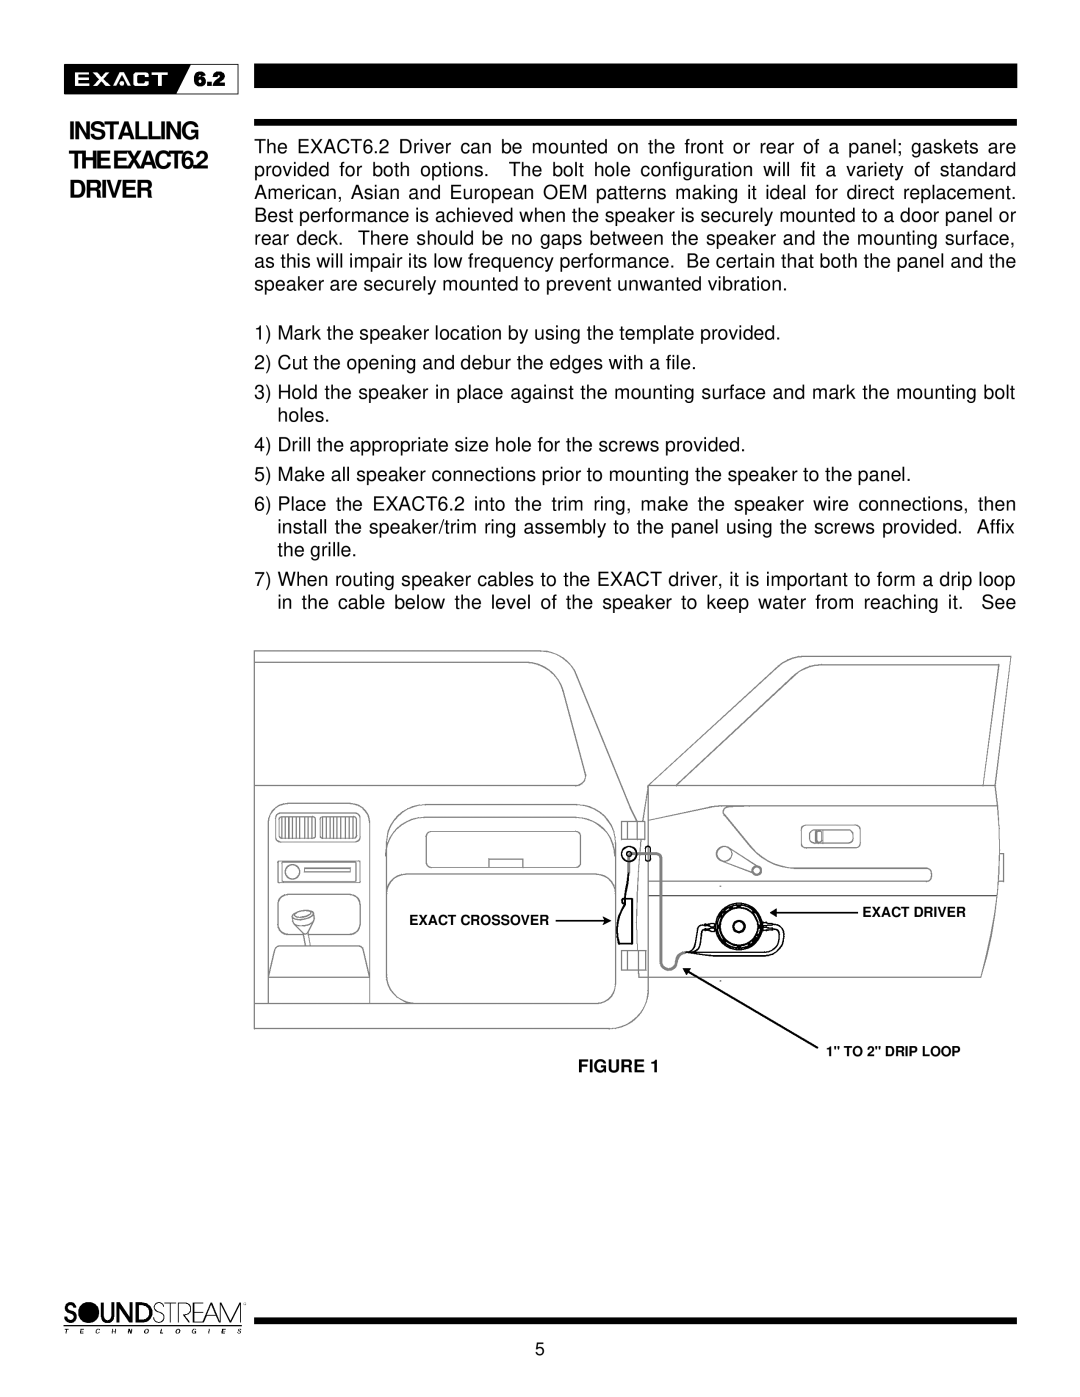 Soundstream Technologies Exact 6.2 owner manual Driver, INSTALLING THEEXACT6.2 